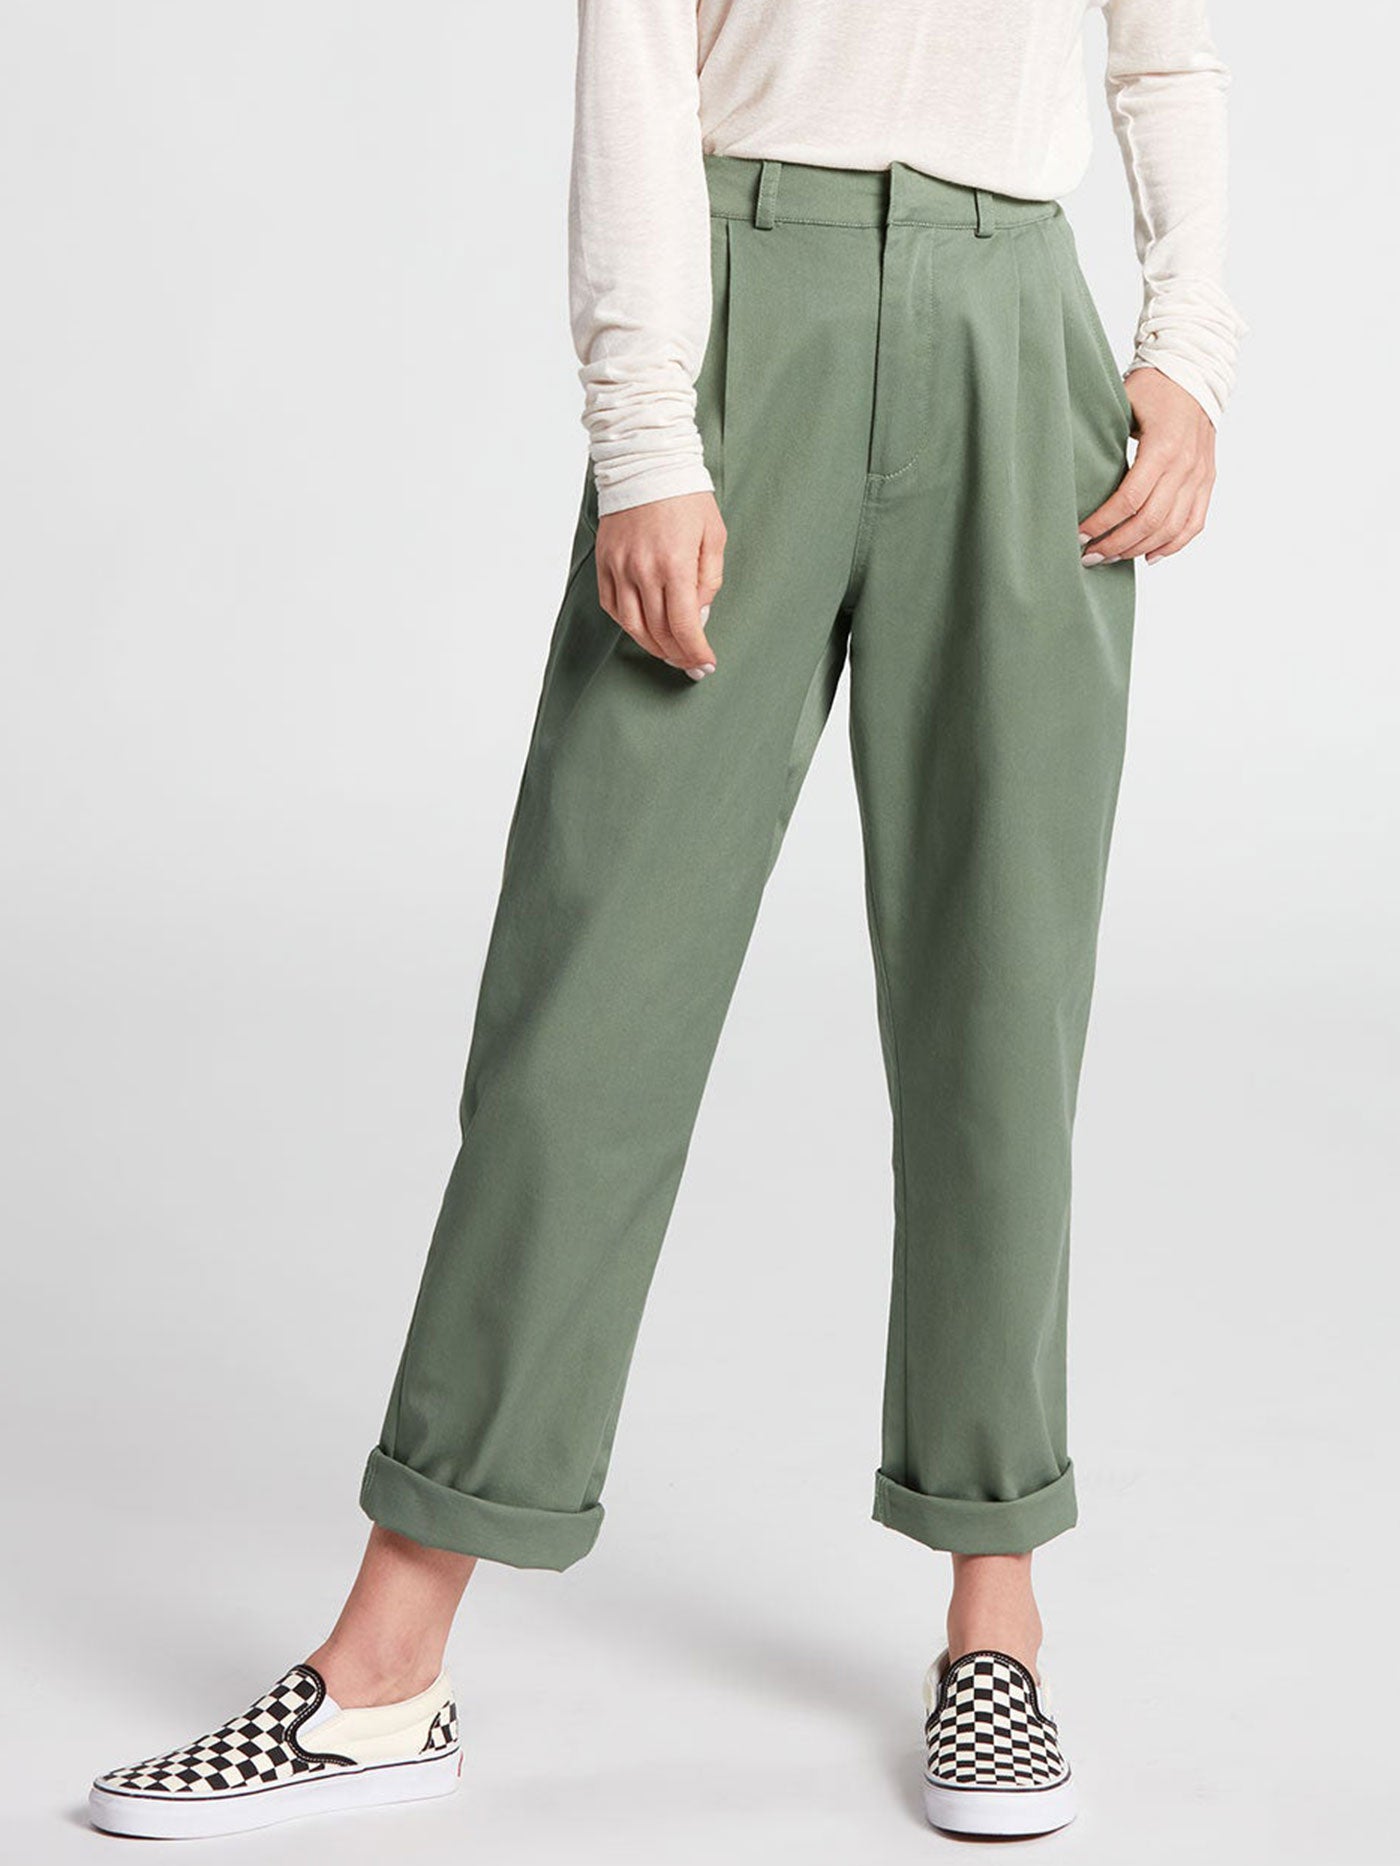 Volcom Spring 2022 Frochickie Pants